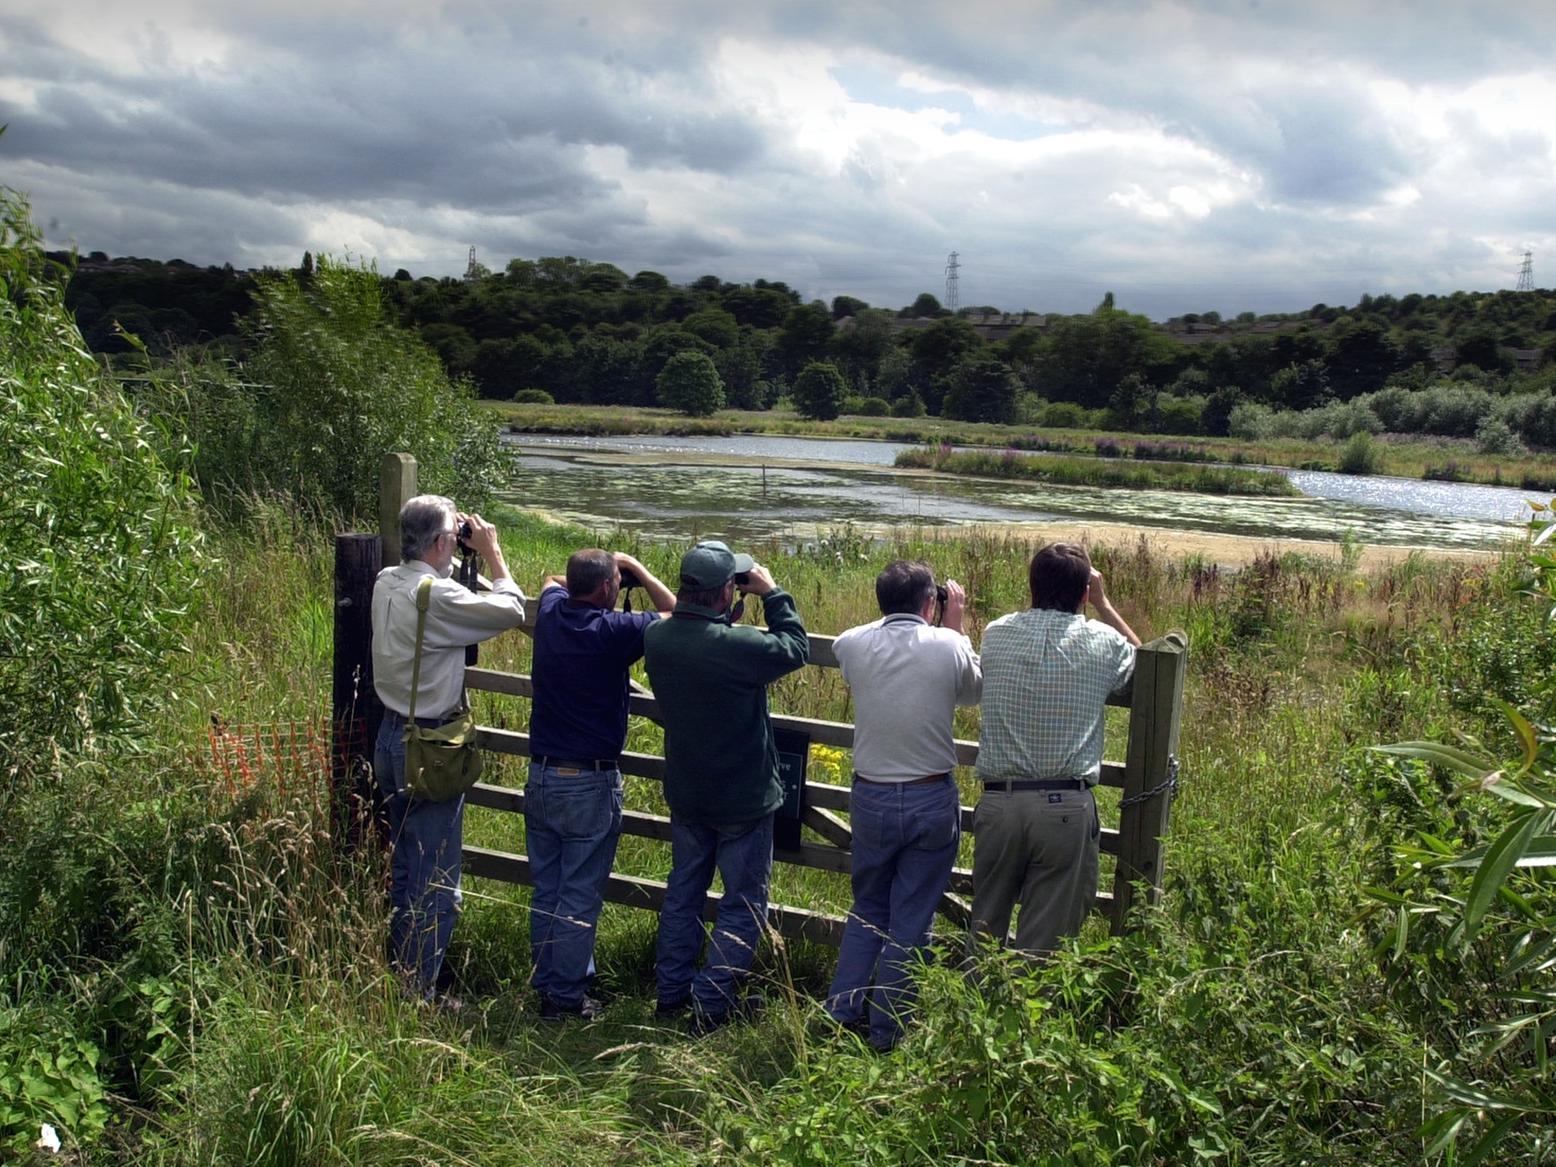 Birdwatchers get a rare chance to see the Marbled Duck at Rodley Nature Reserve.